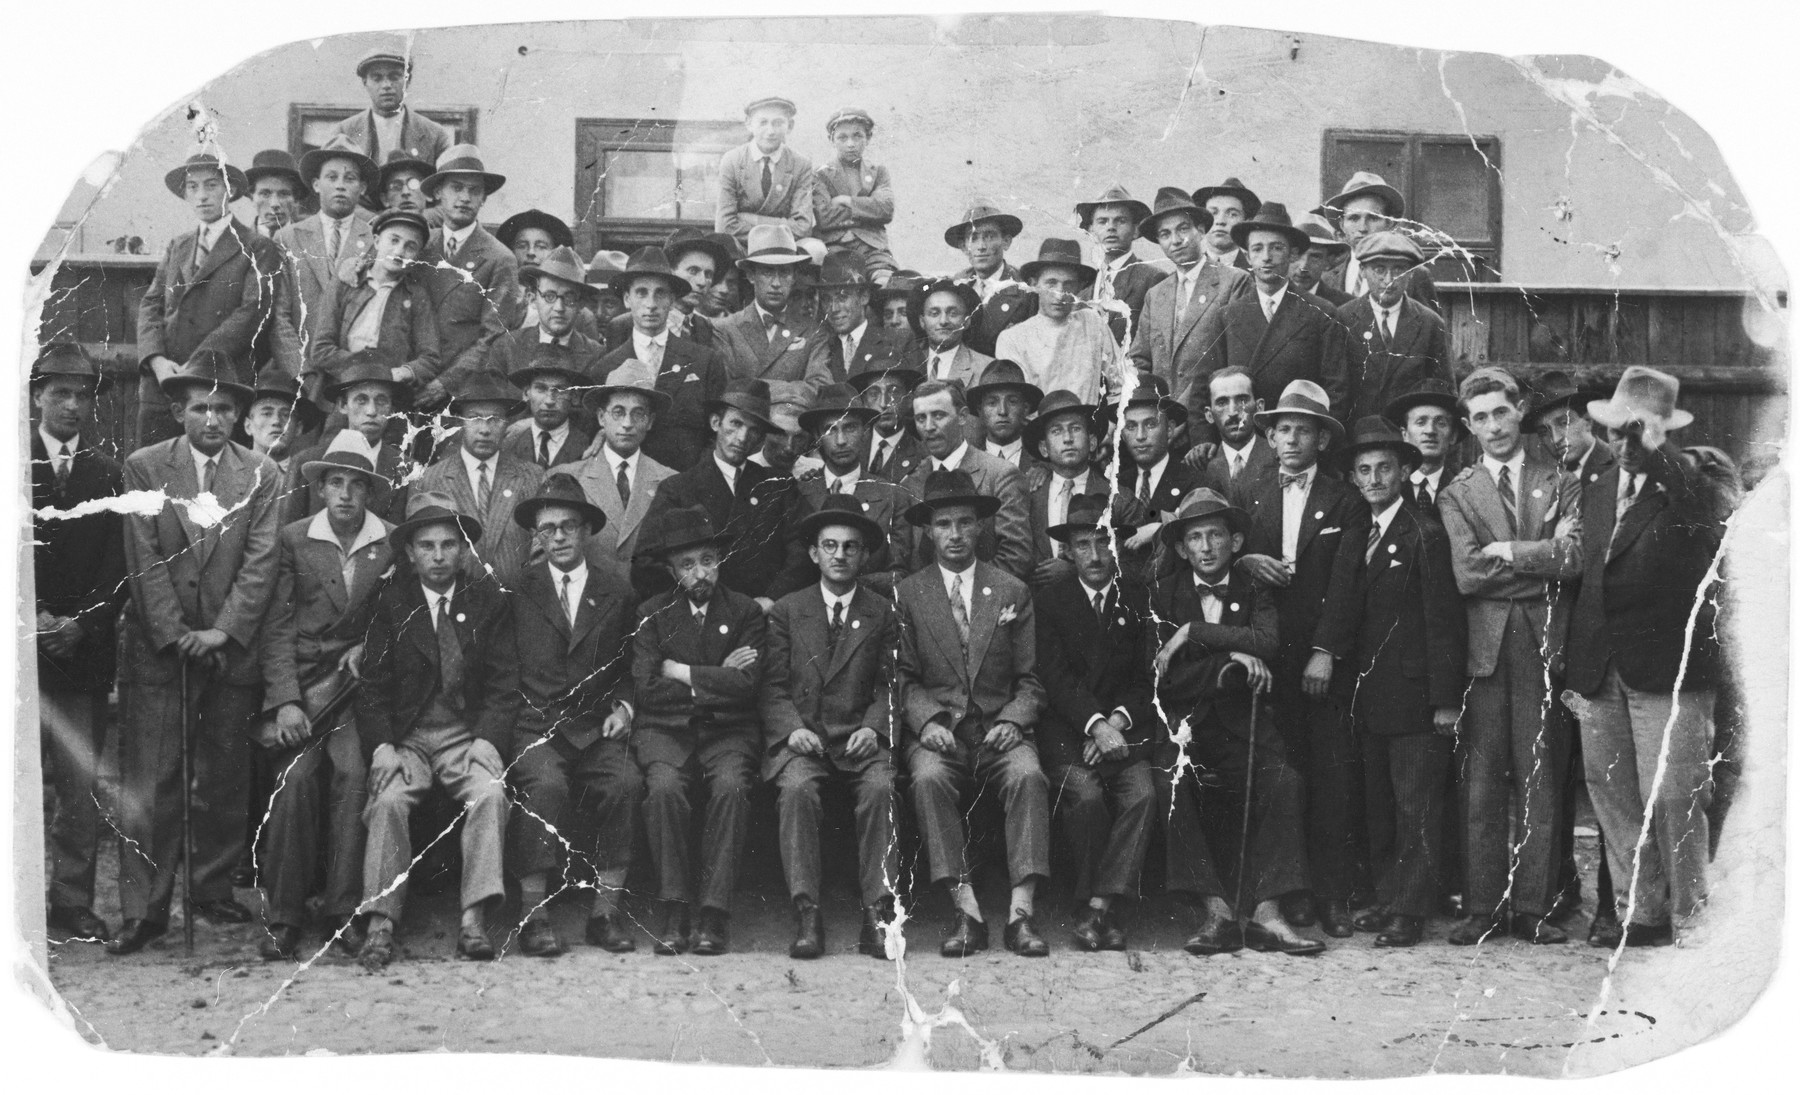 Group portrait of the members of the Mizrahi Zionist movement in Sighet.

Among those pictured are the leader, Mr. Koffler, head of the Jewish administration in Sighet.  Also pictured are Nachum Feldman, Moshe Yuszt, Efraim Raht, Yossy Yuszt and Ali Israel.